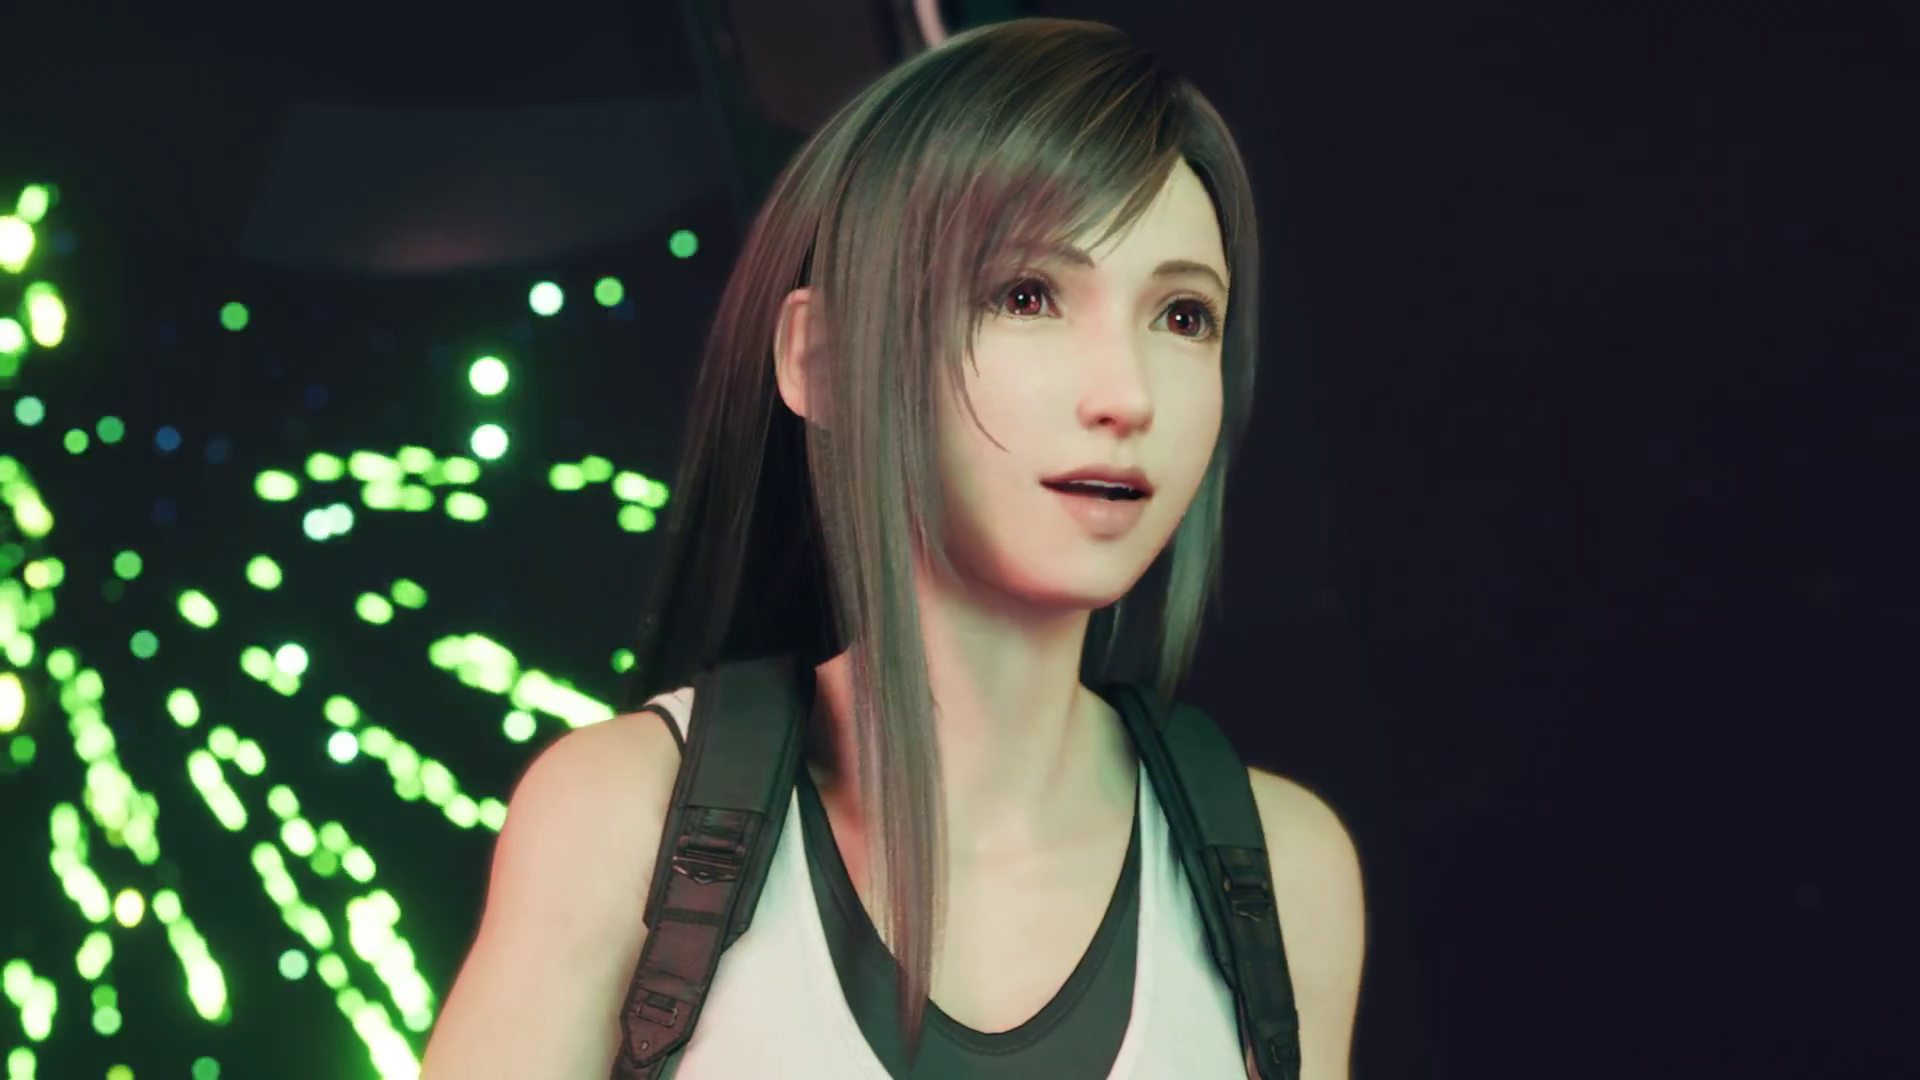 Tifa stares ahead while riding the Gold Saucer ferris wheel in FF7 Rebirth